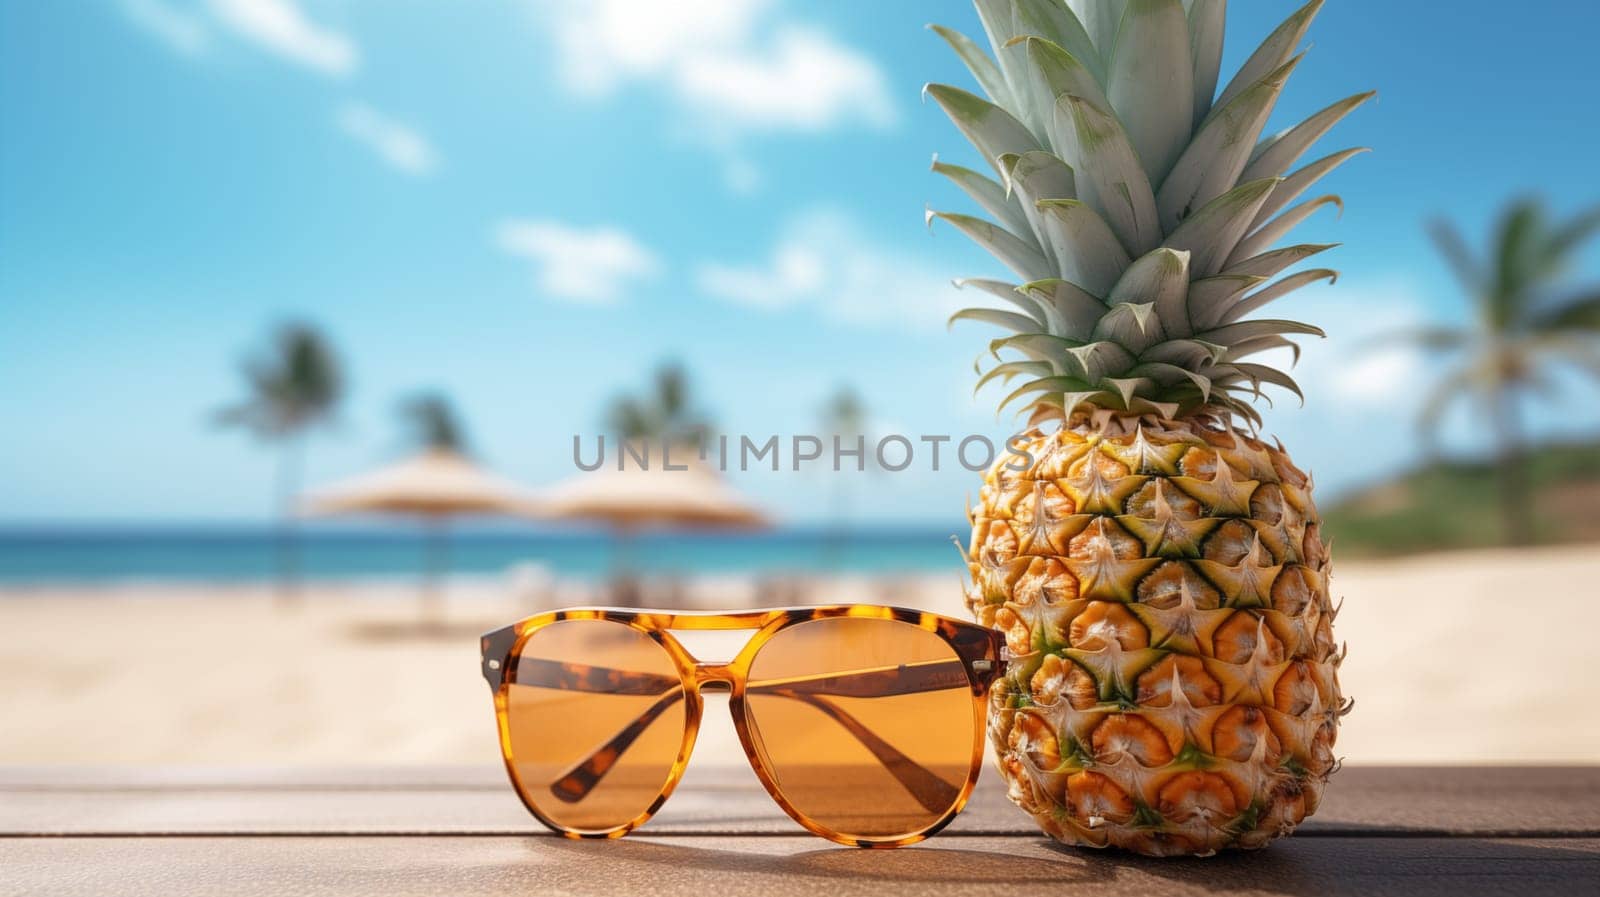 Fresh Pineapple and sunglasses stand on the beach by Zakharova